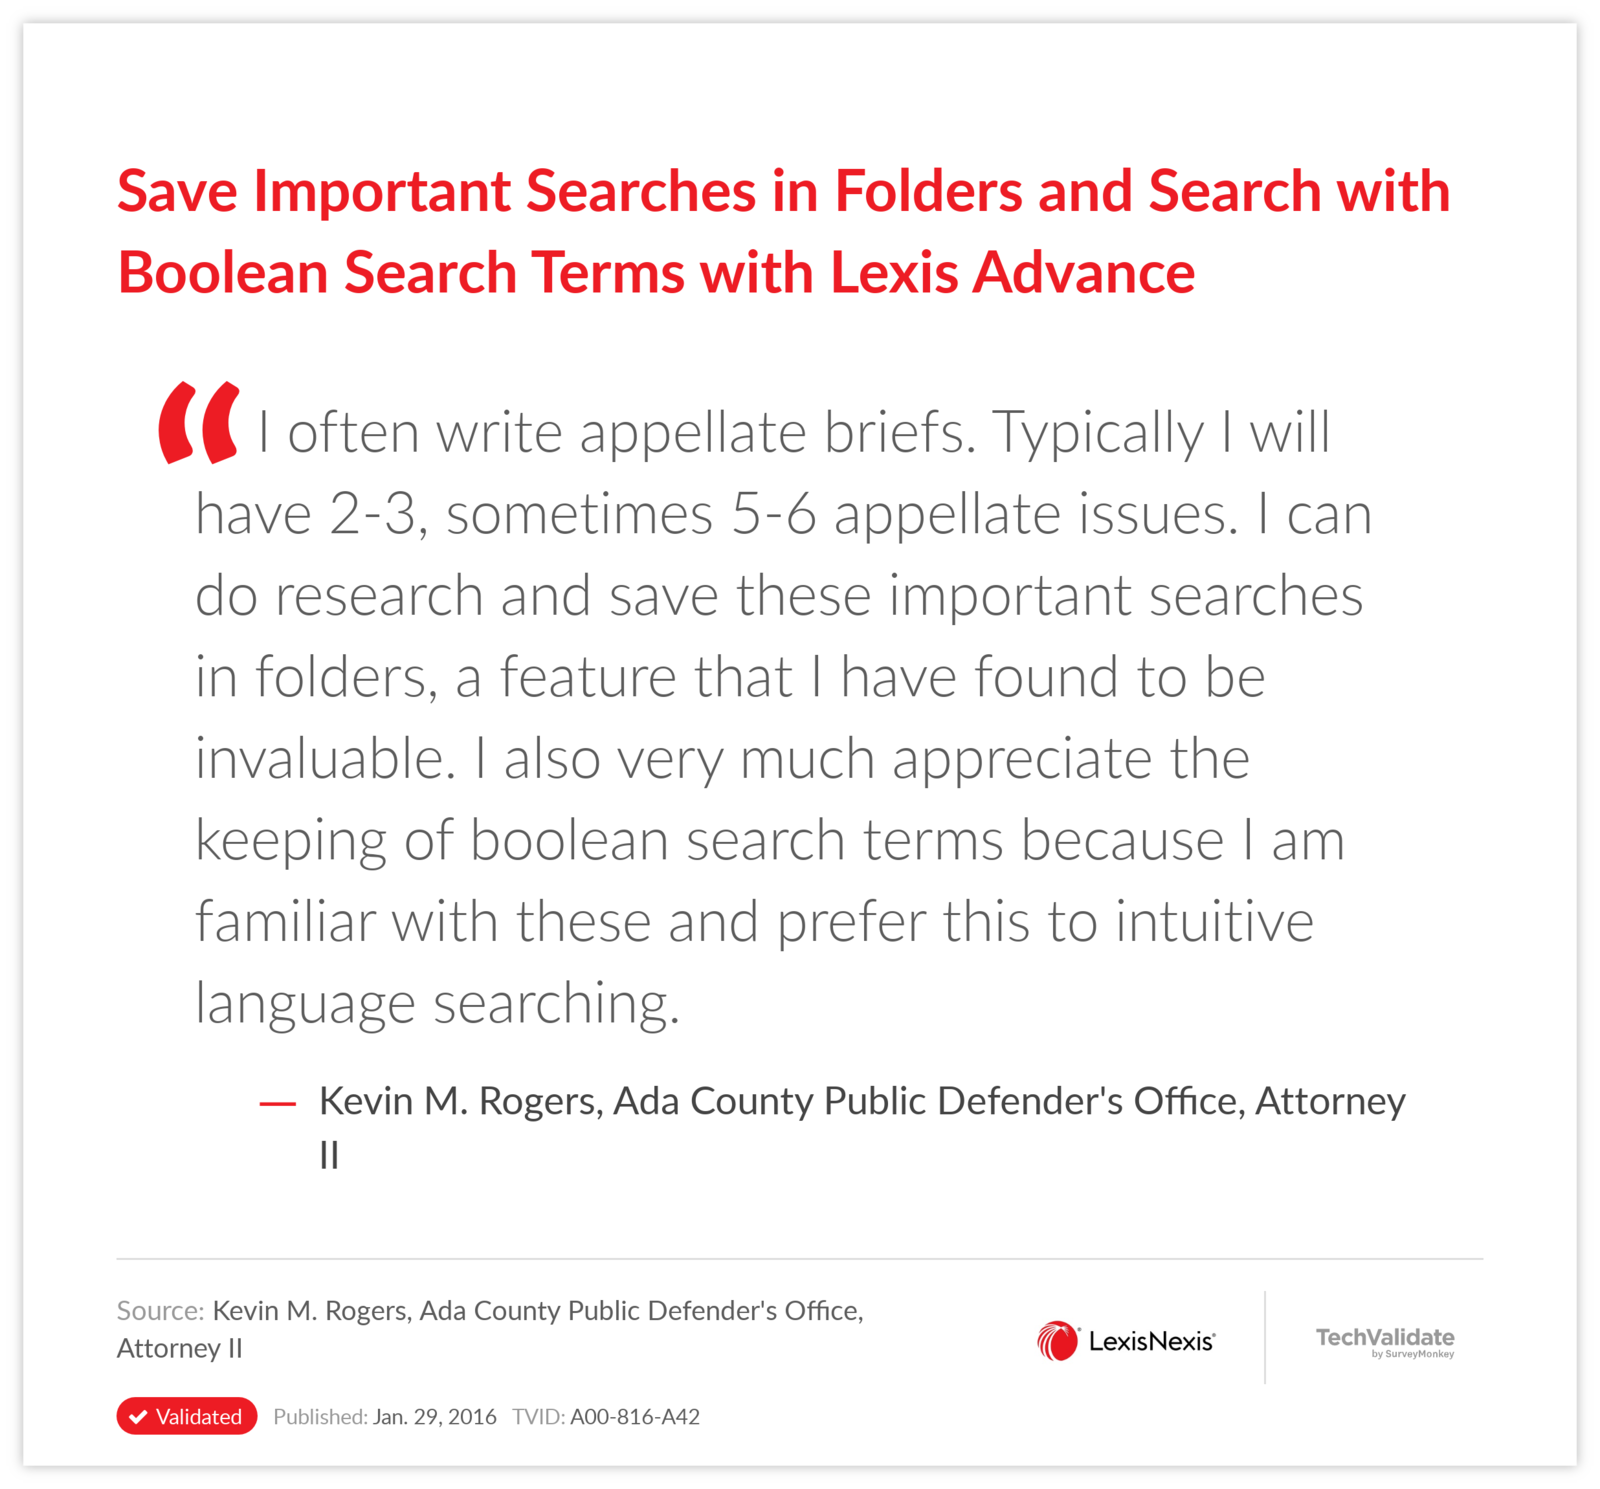 Save Important Searches in Folders and Search with Boolean Search Terms with Lexis Advance